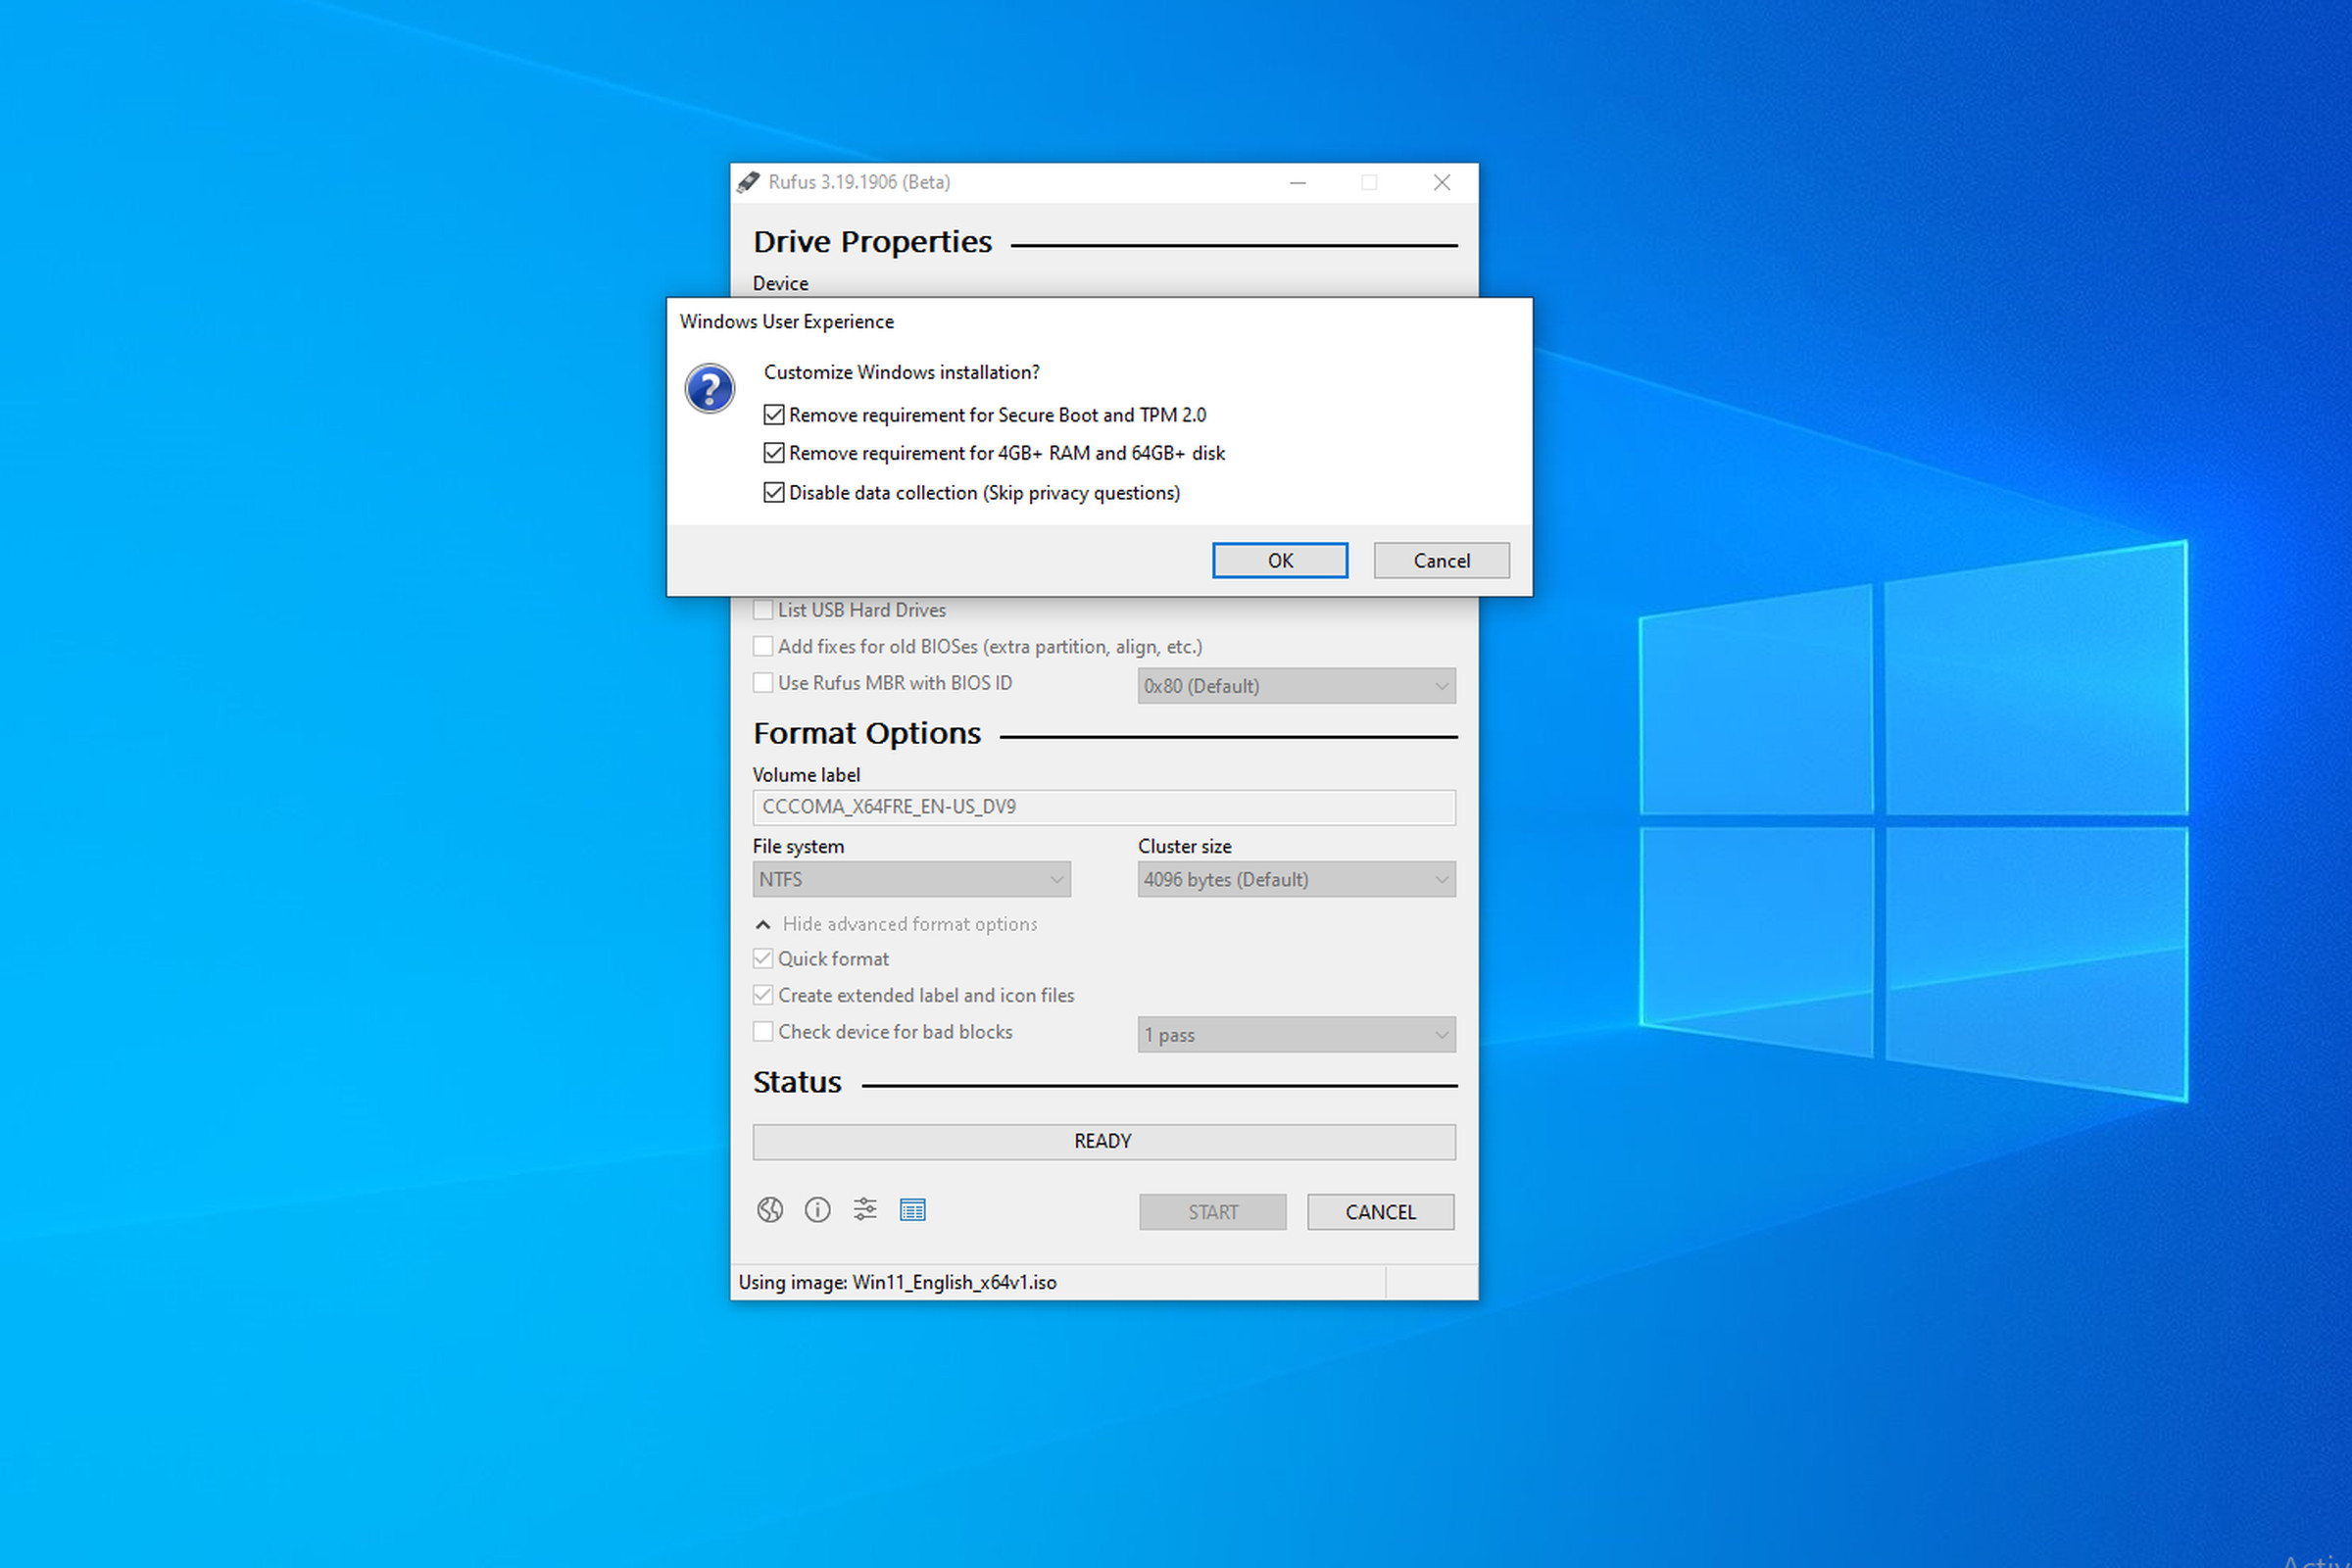 Rufus 3.19 Beta has options when you start creating the bootable windows installer.